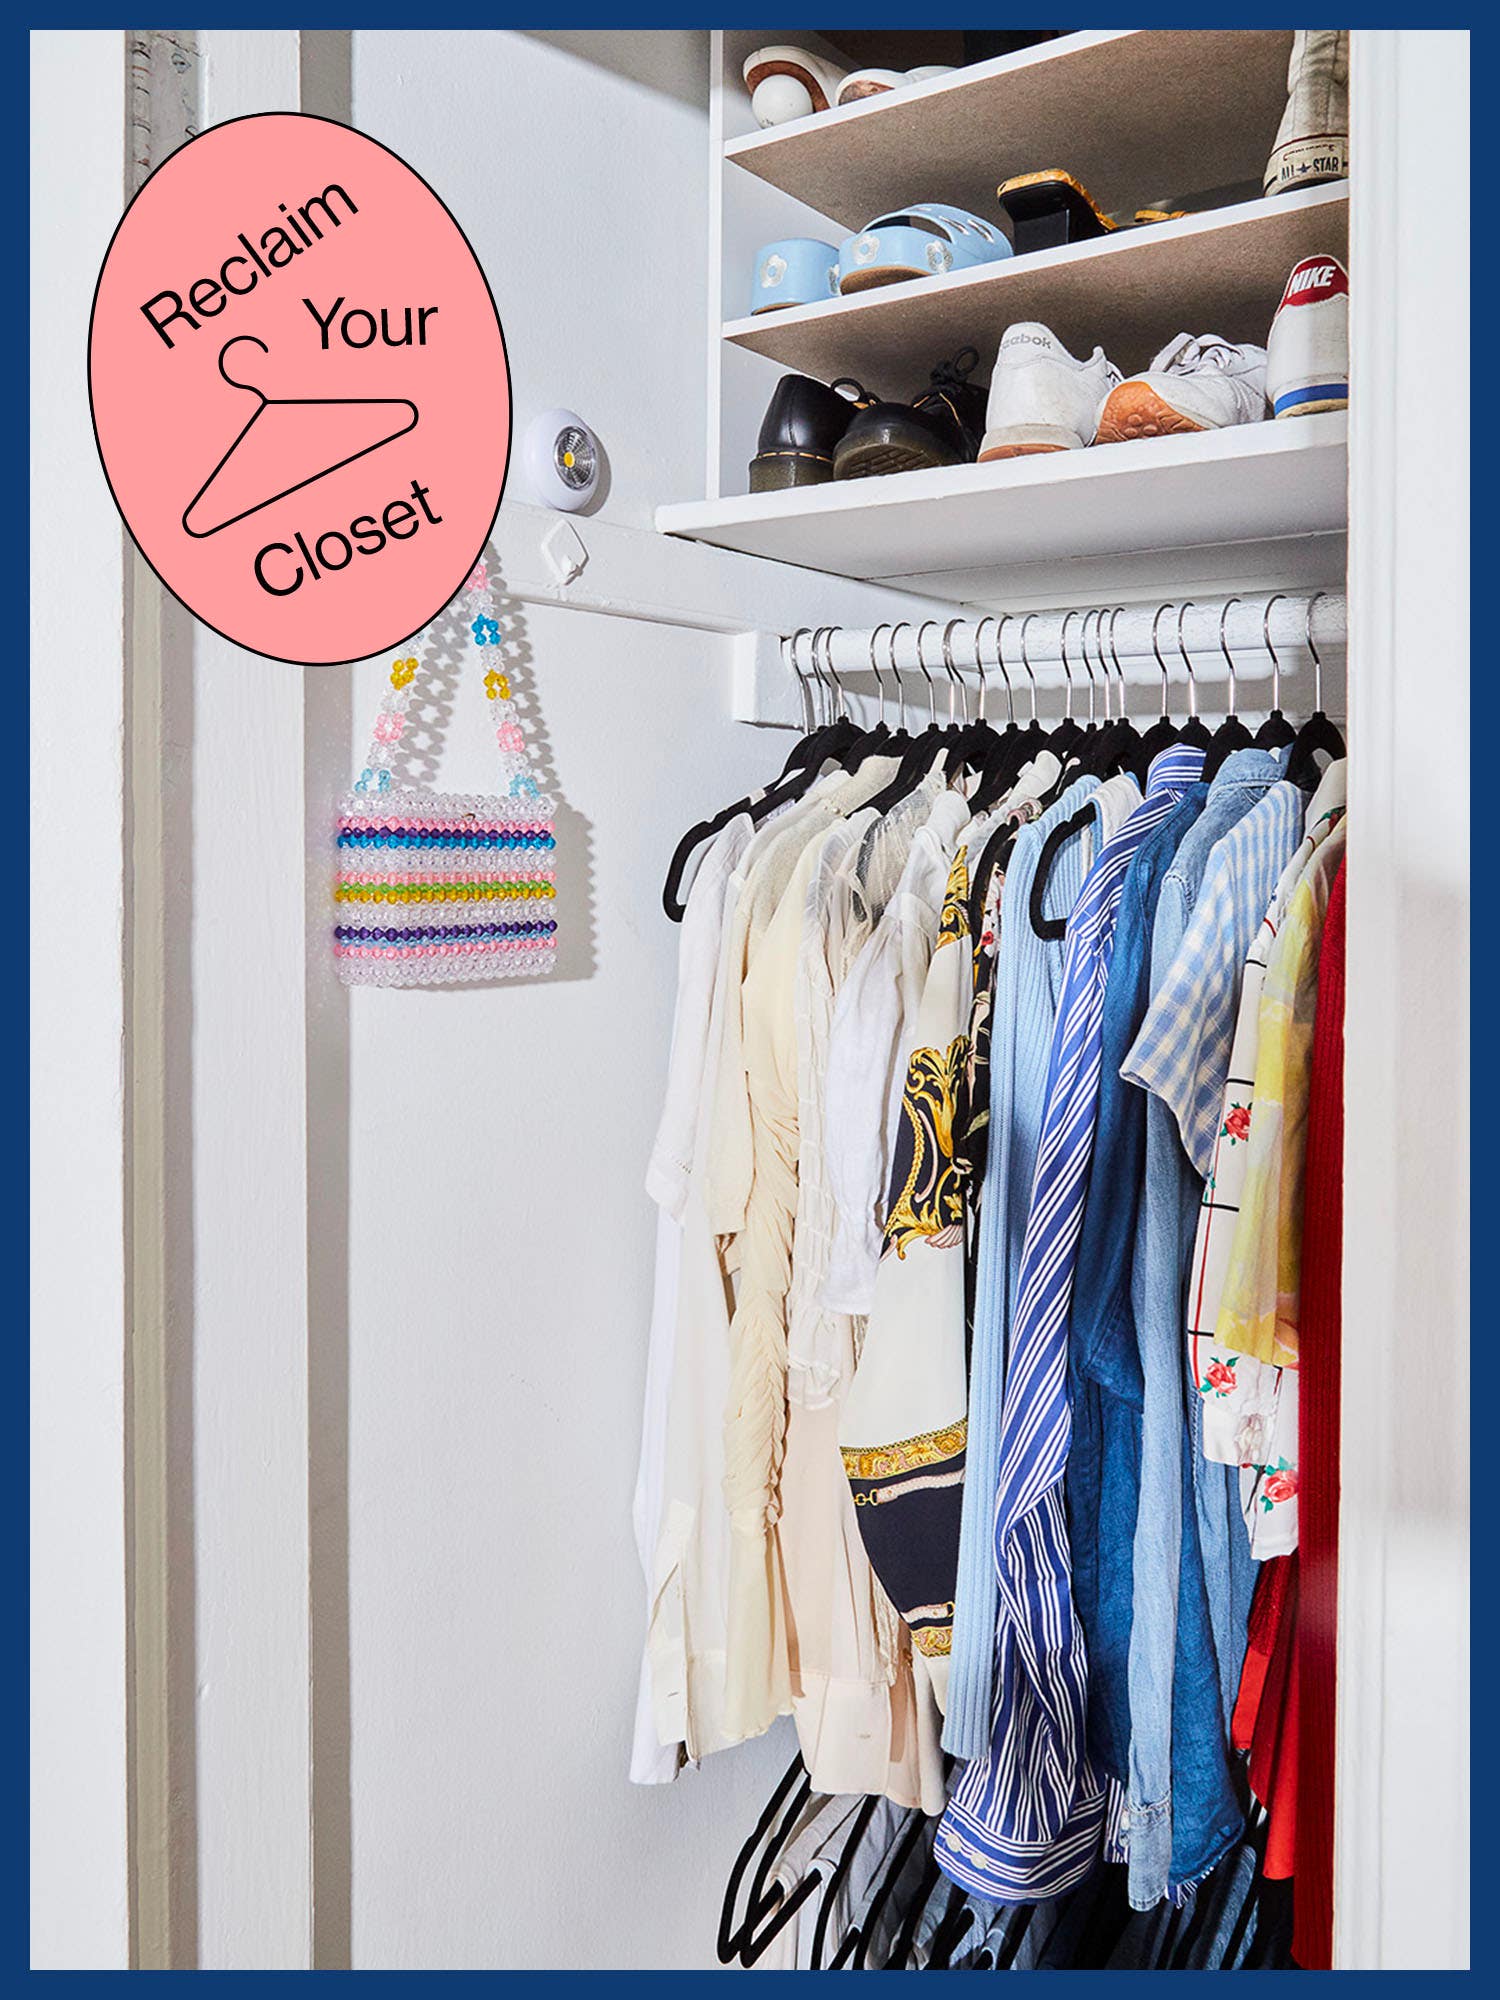 Open closet with the words Reclaim Your Closet on top